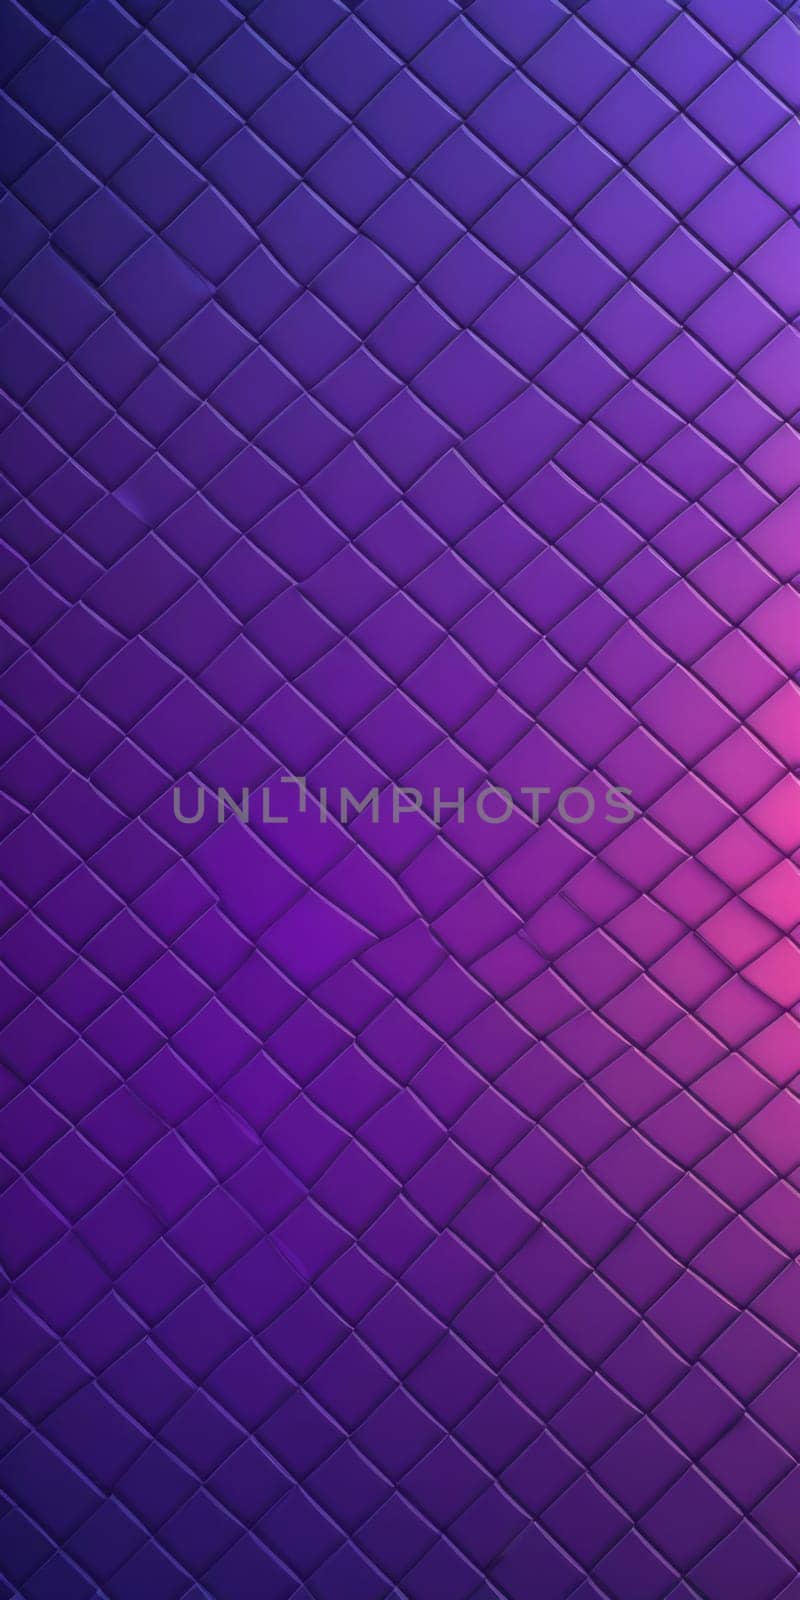 Mosaic Shapes in Purple and Violet by nkotlyar